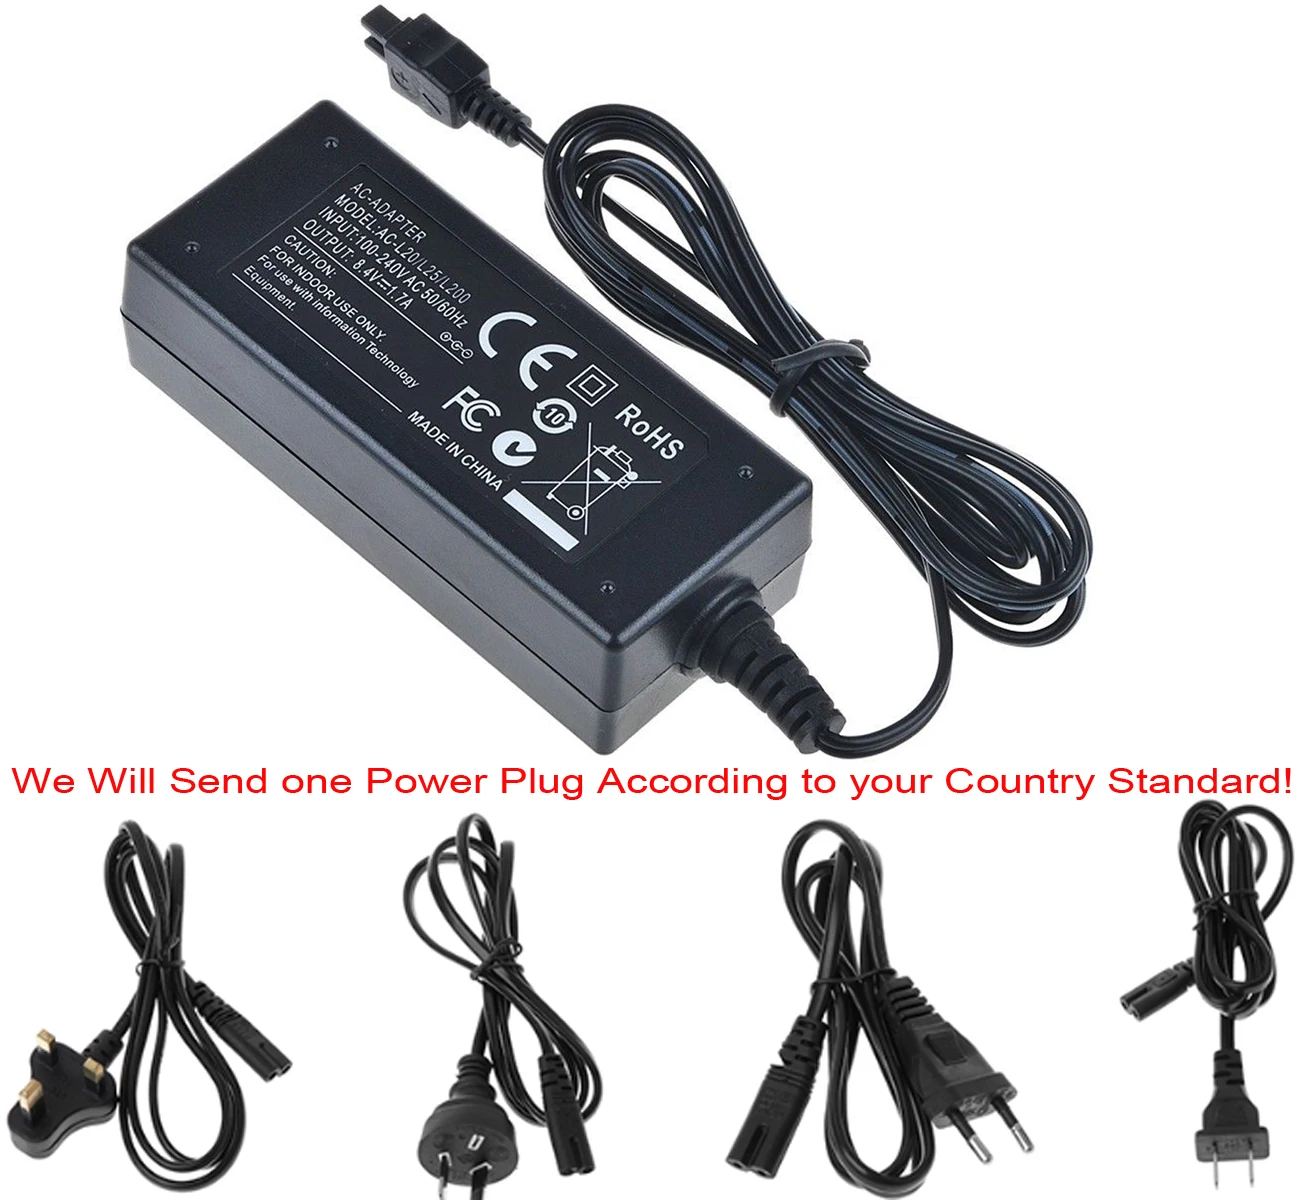 NP-FH50 LCD USB Charger for Sony DCR-DVD108 DCR-DVD610 DCR-DVD105 DCR-HC21 DCR-HC52 DCR-HC38 DCR-SR45 DCR-SR47 DCR-SX85 DCR-SX45 DCR-SX44 HDR-SR11 HDR-SR12 HDR-XR160 Camera and More 